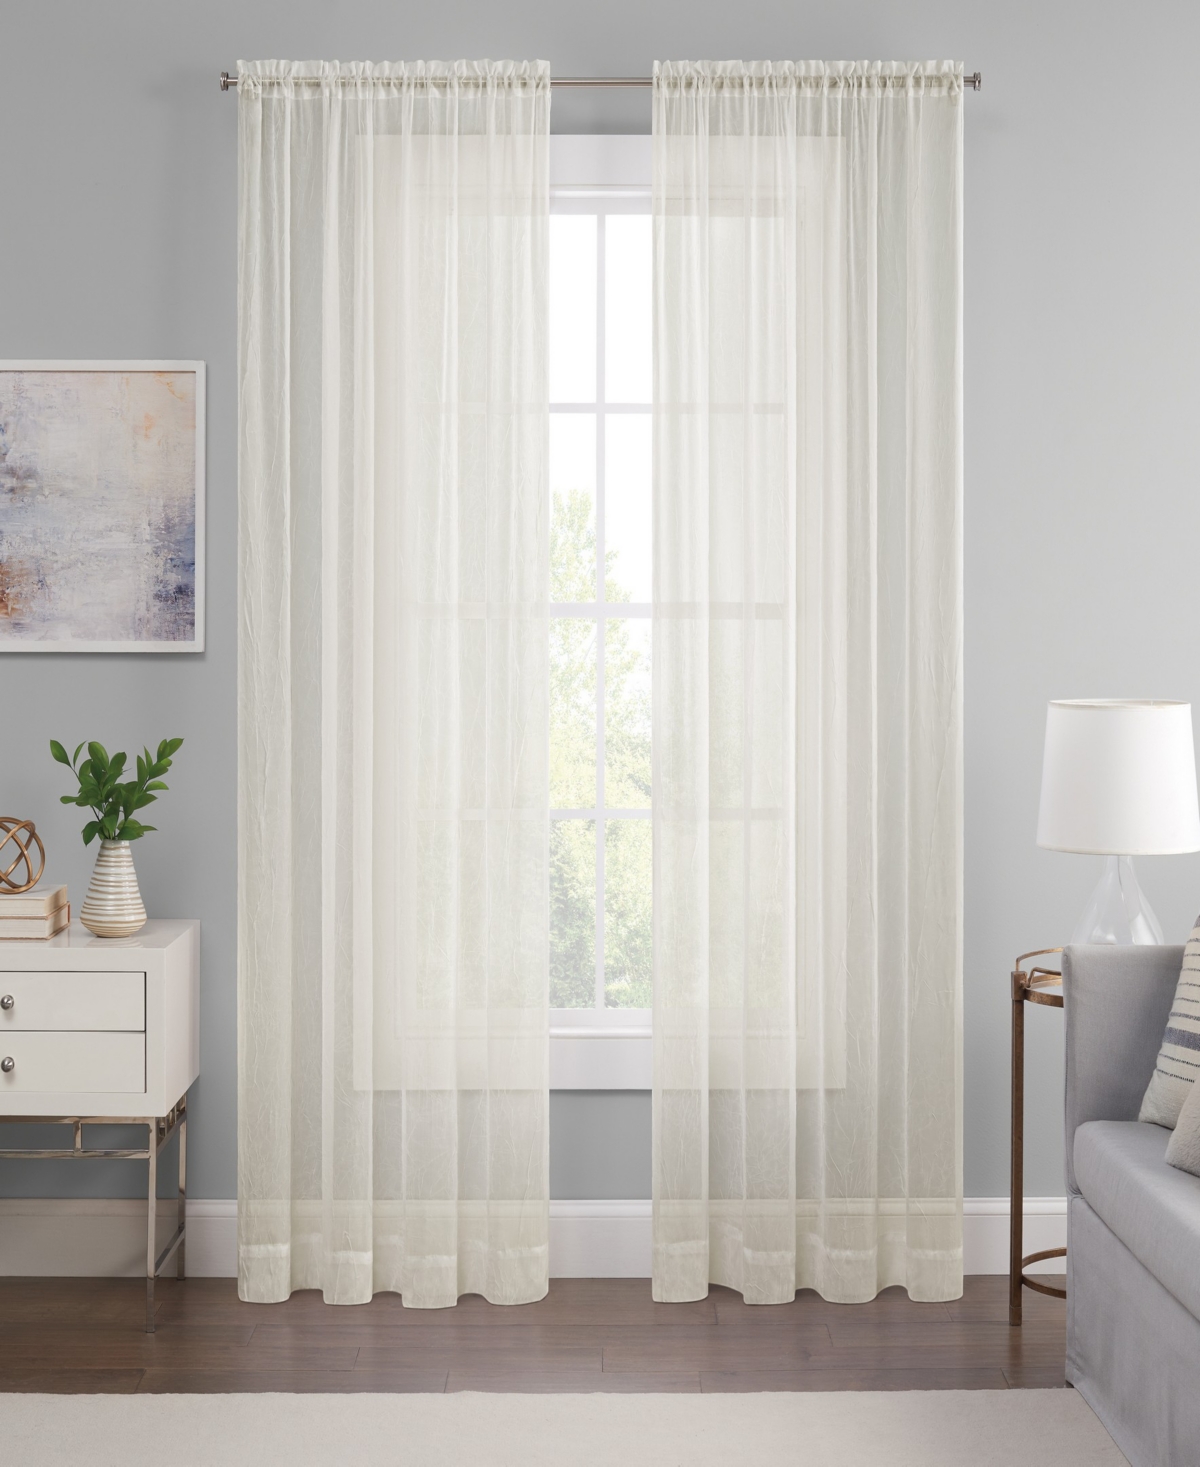 Eclipse Emina Crushed Sheer Voile Rod Pocket Curtain Panel, 52" X 63" In Ivory